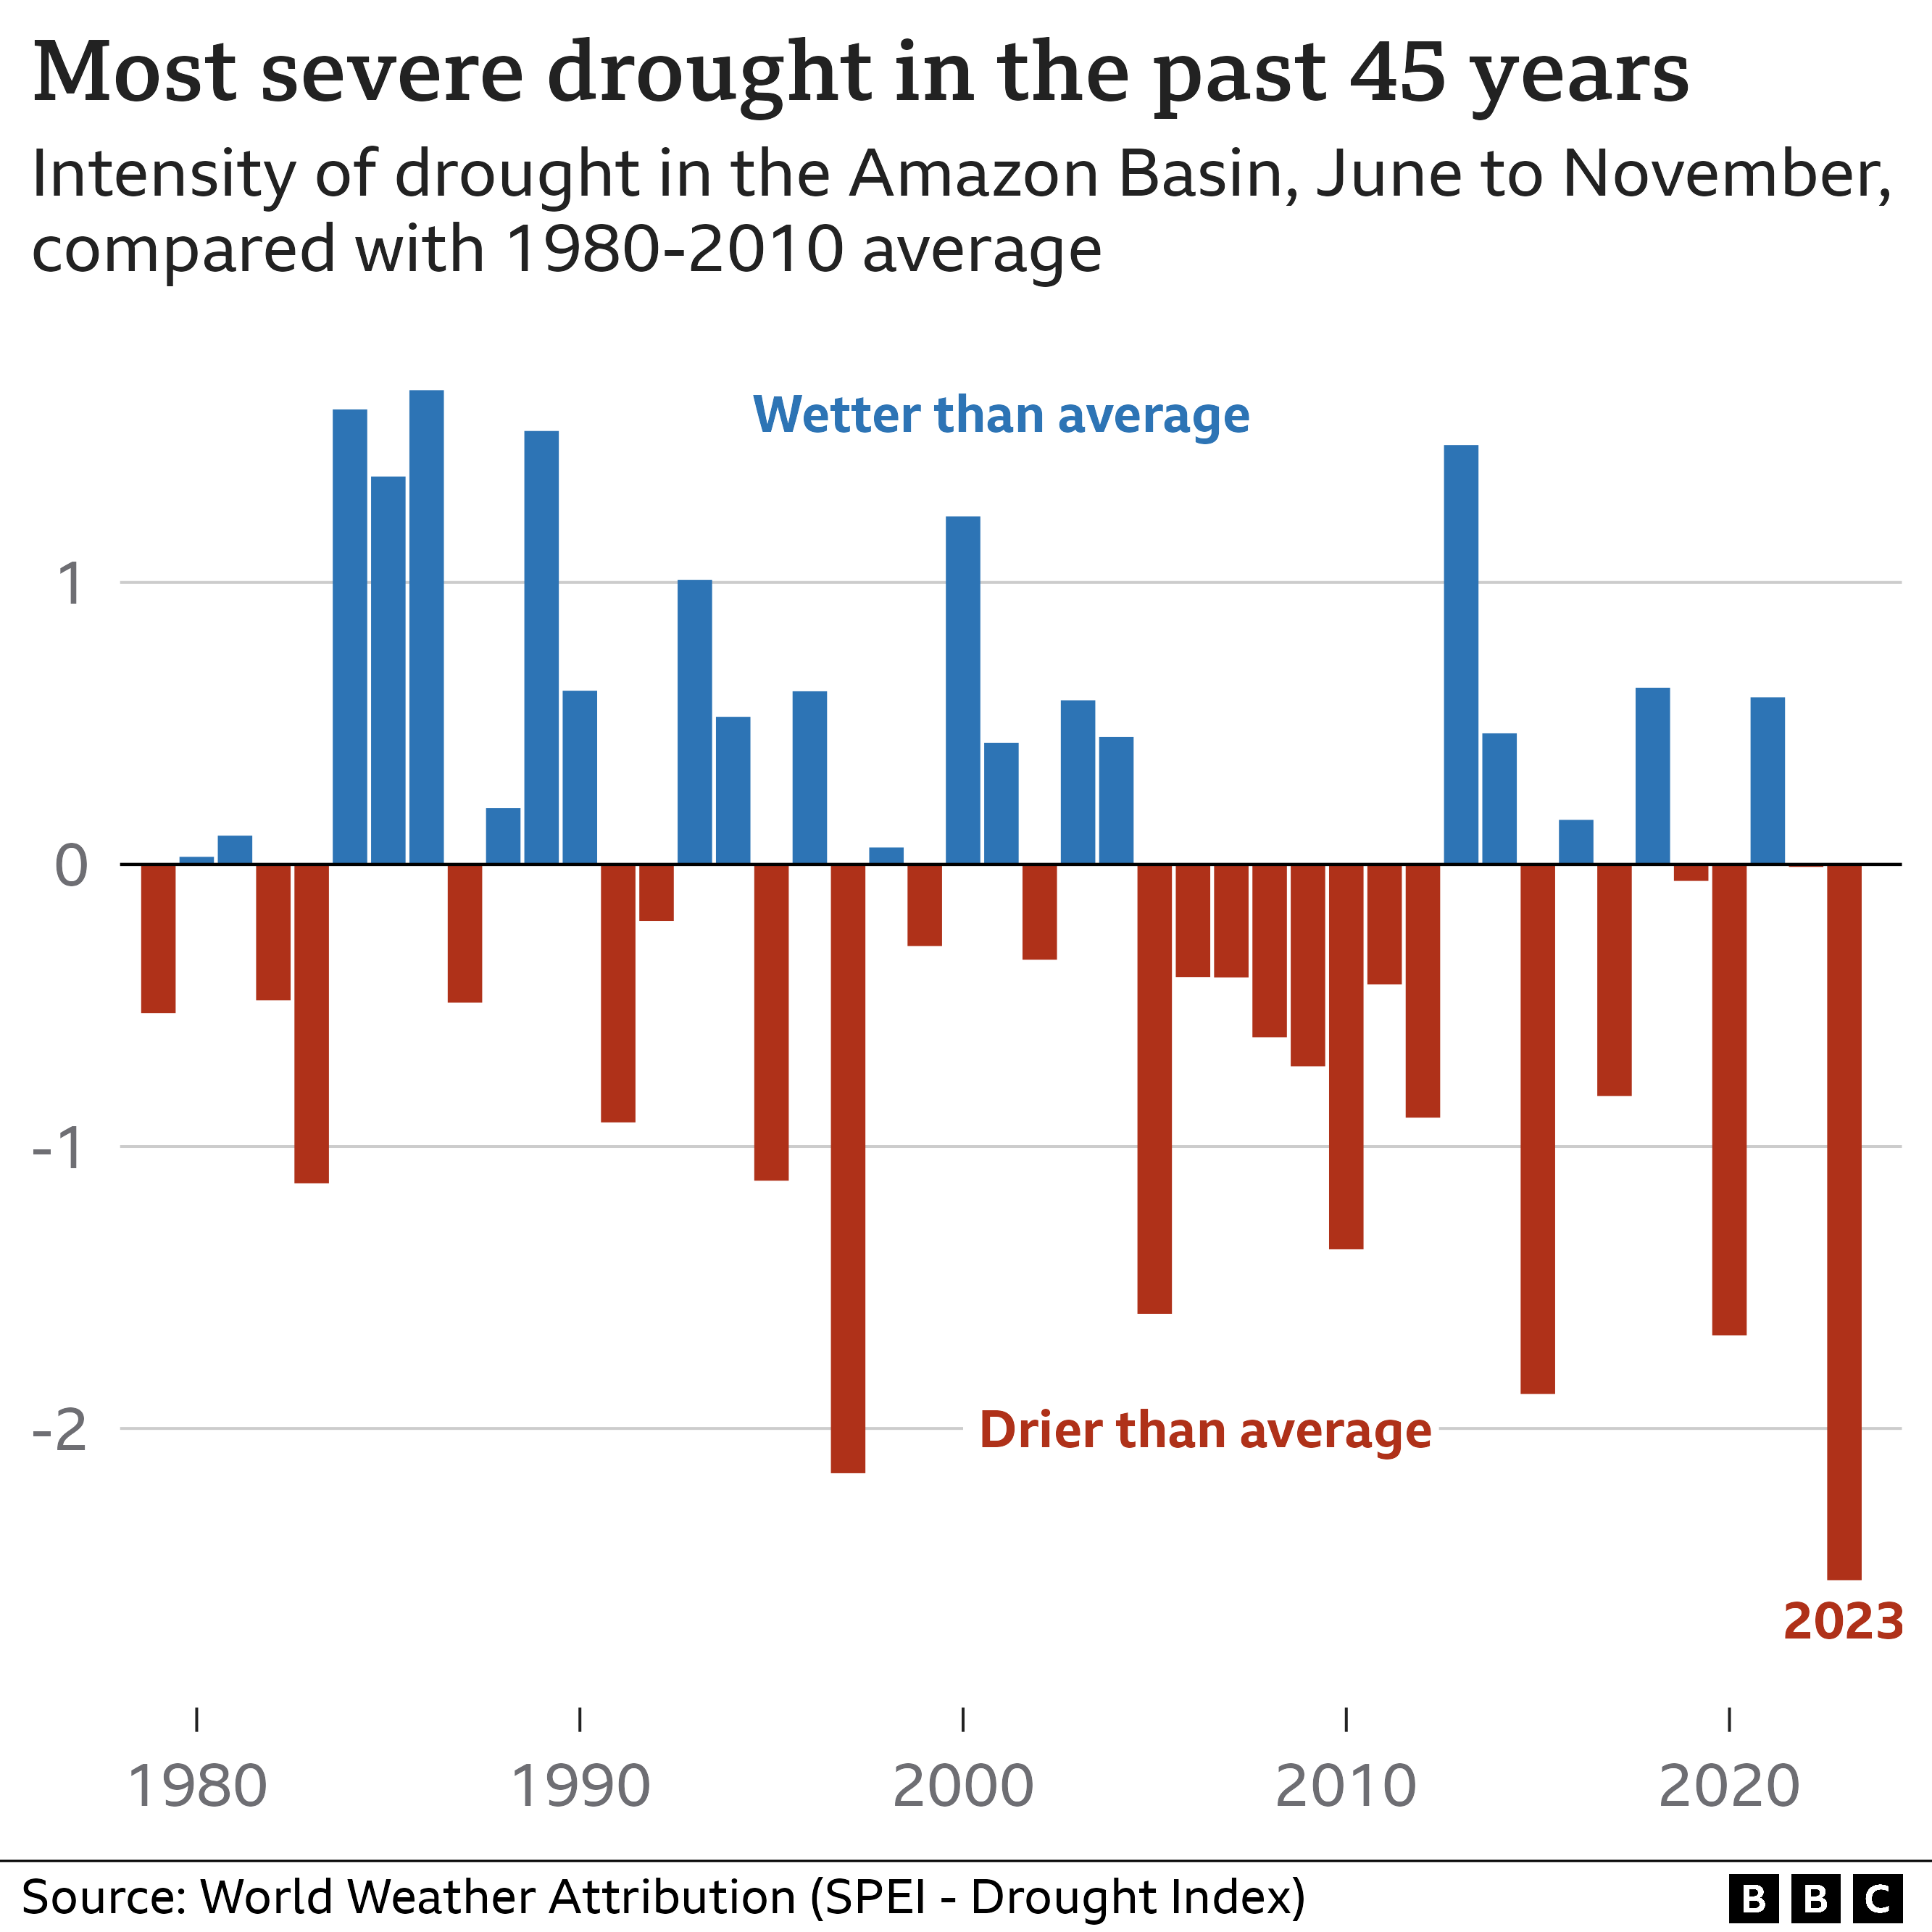 Chart showing the intensity of drought by year for June to November over the past 45 years. In 2023, there was the most intense drought over this period.